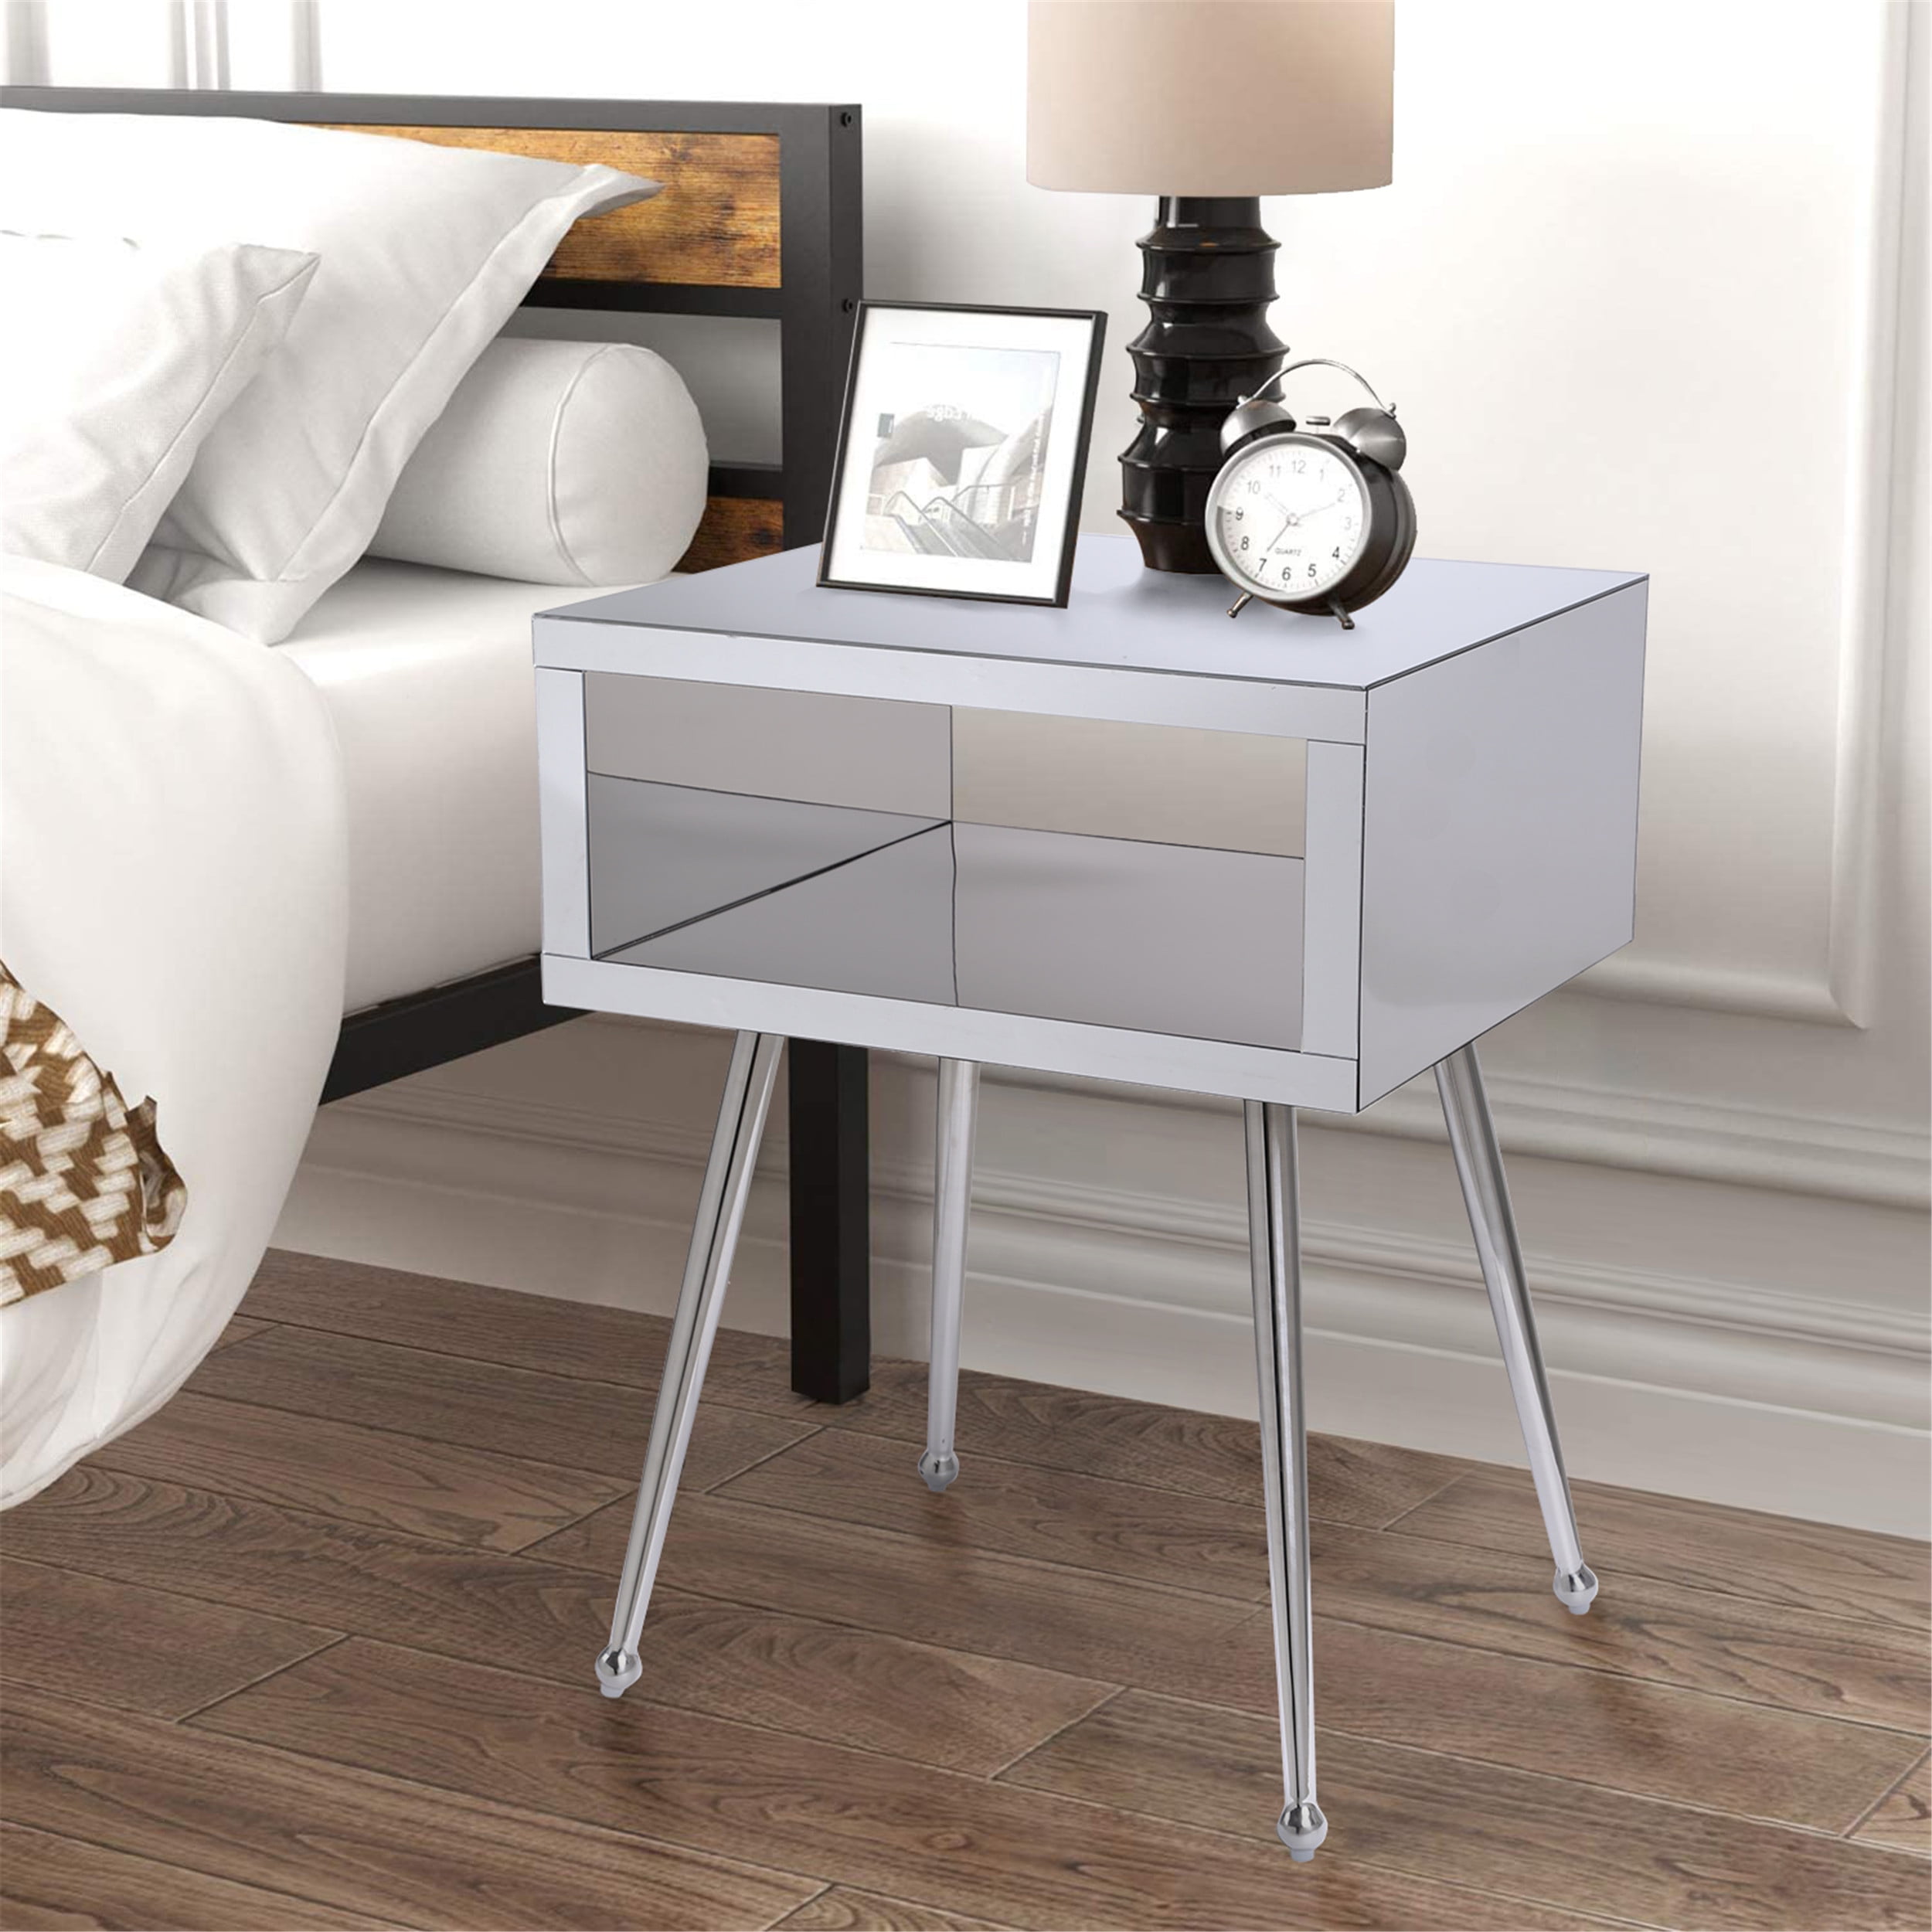 Promotion Mirror Side Table End, Narrow Mirrored End Tables